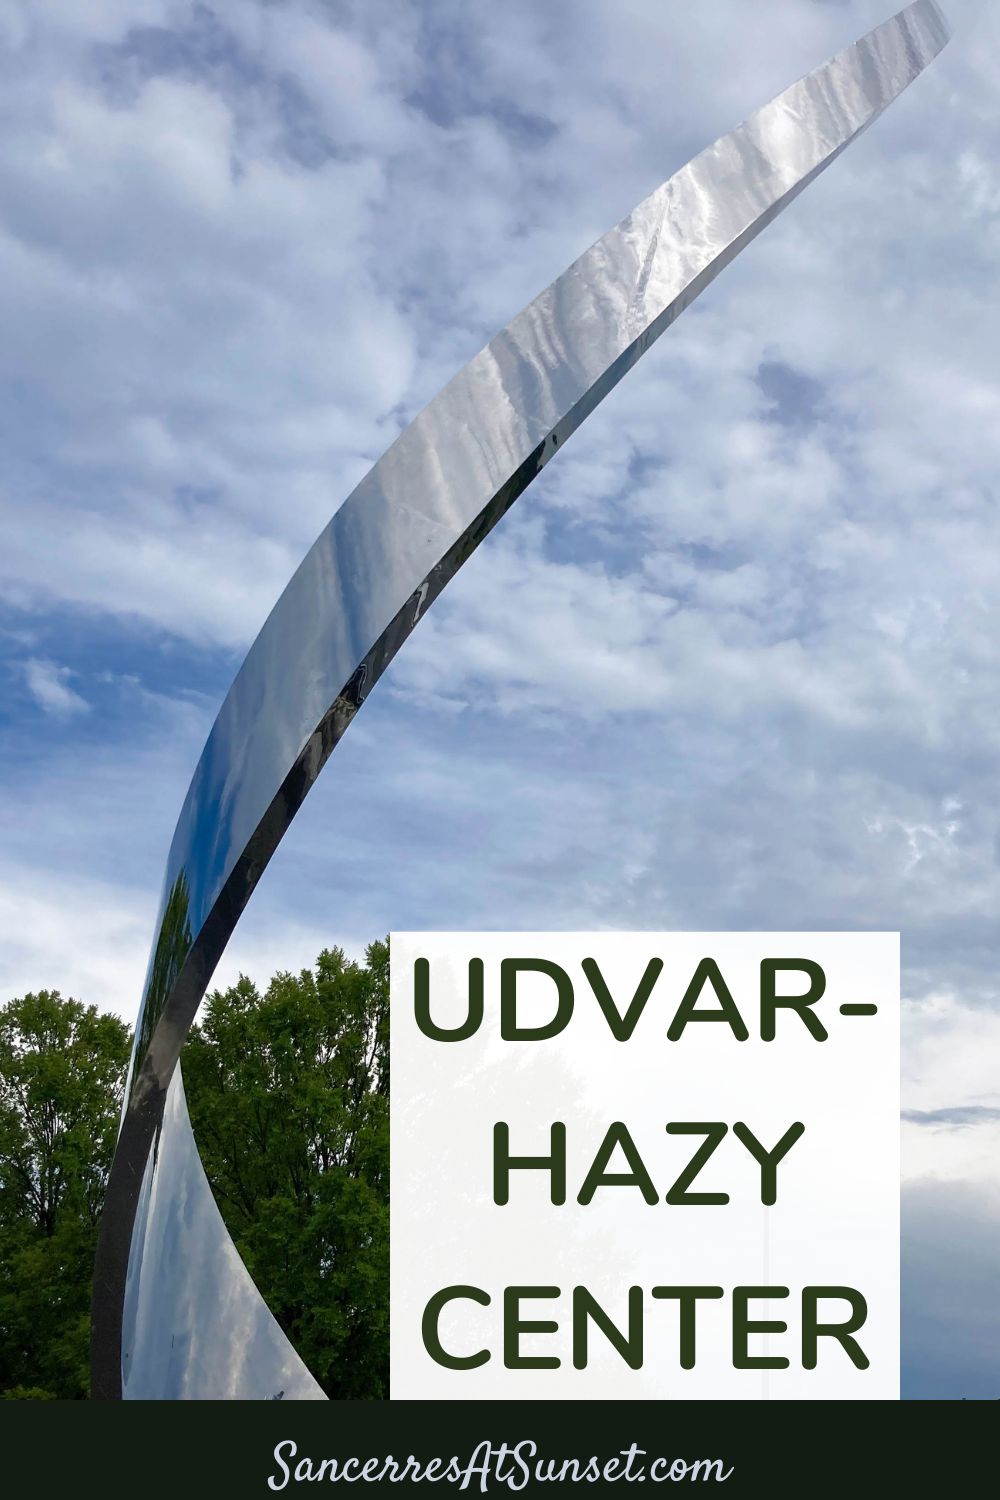 Udvar-Hazy Center -- part of the Smithsonian\'s National Air and Space Museum in Chantilly, Virginia